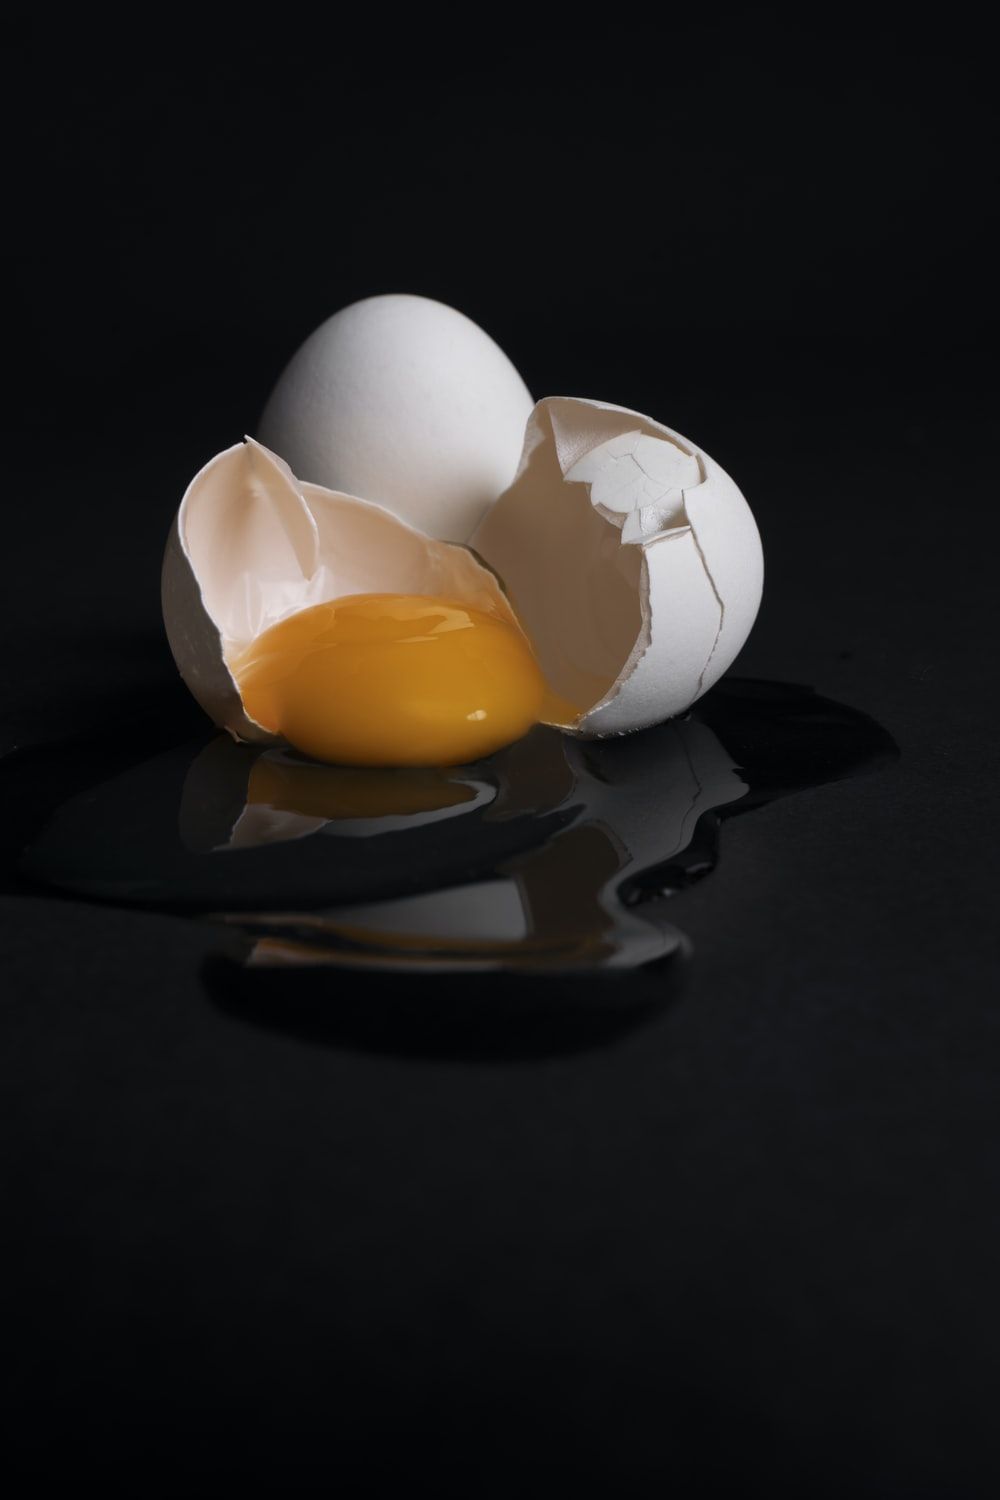 Egg Yolk Picture. Download Free Image